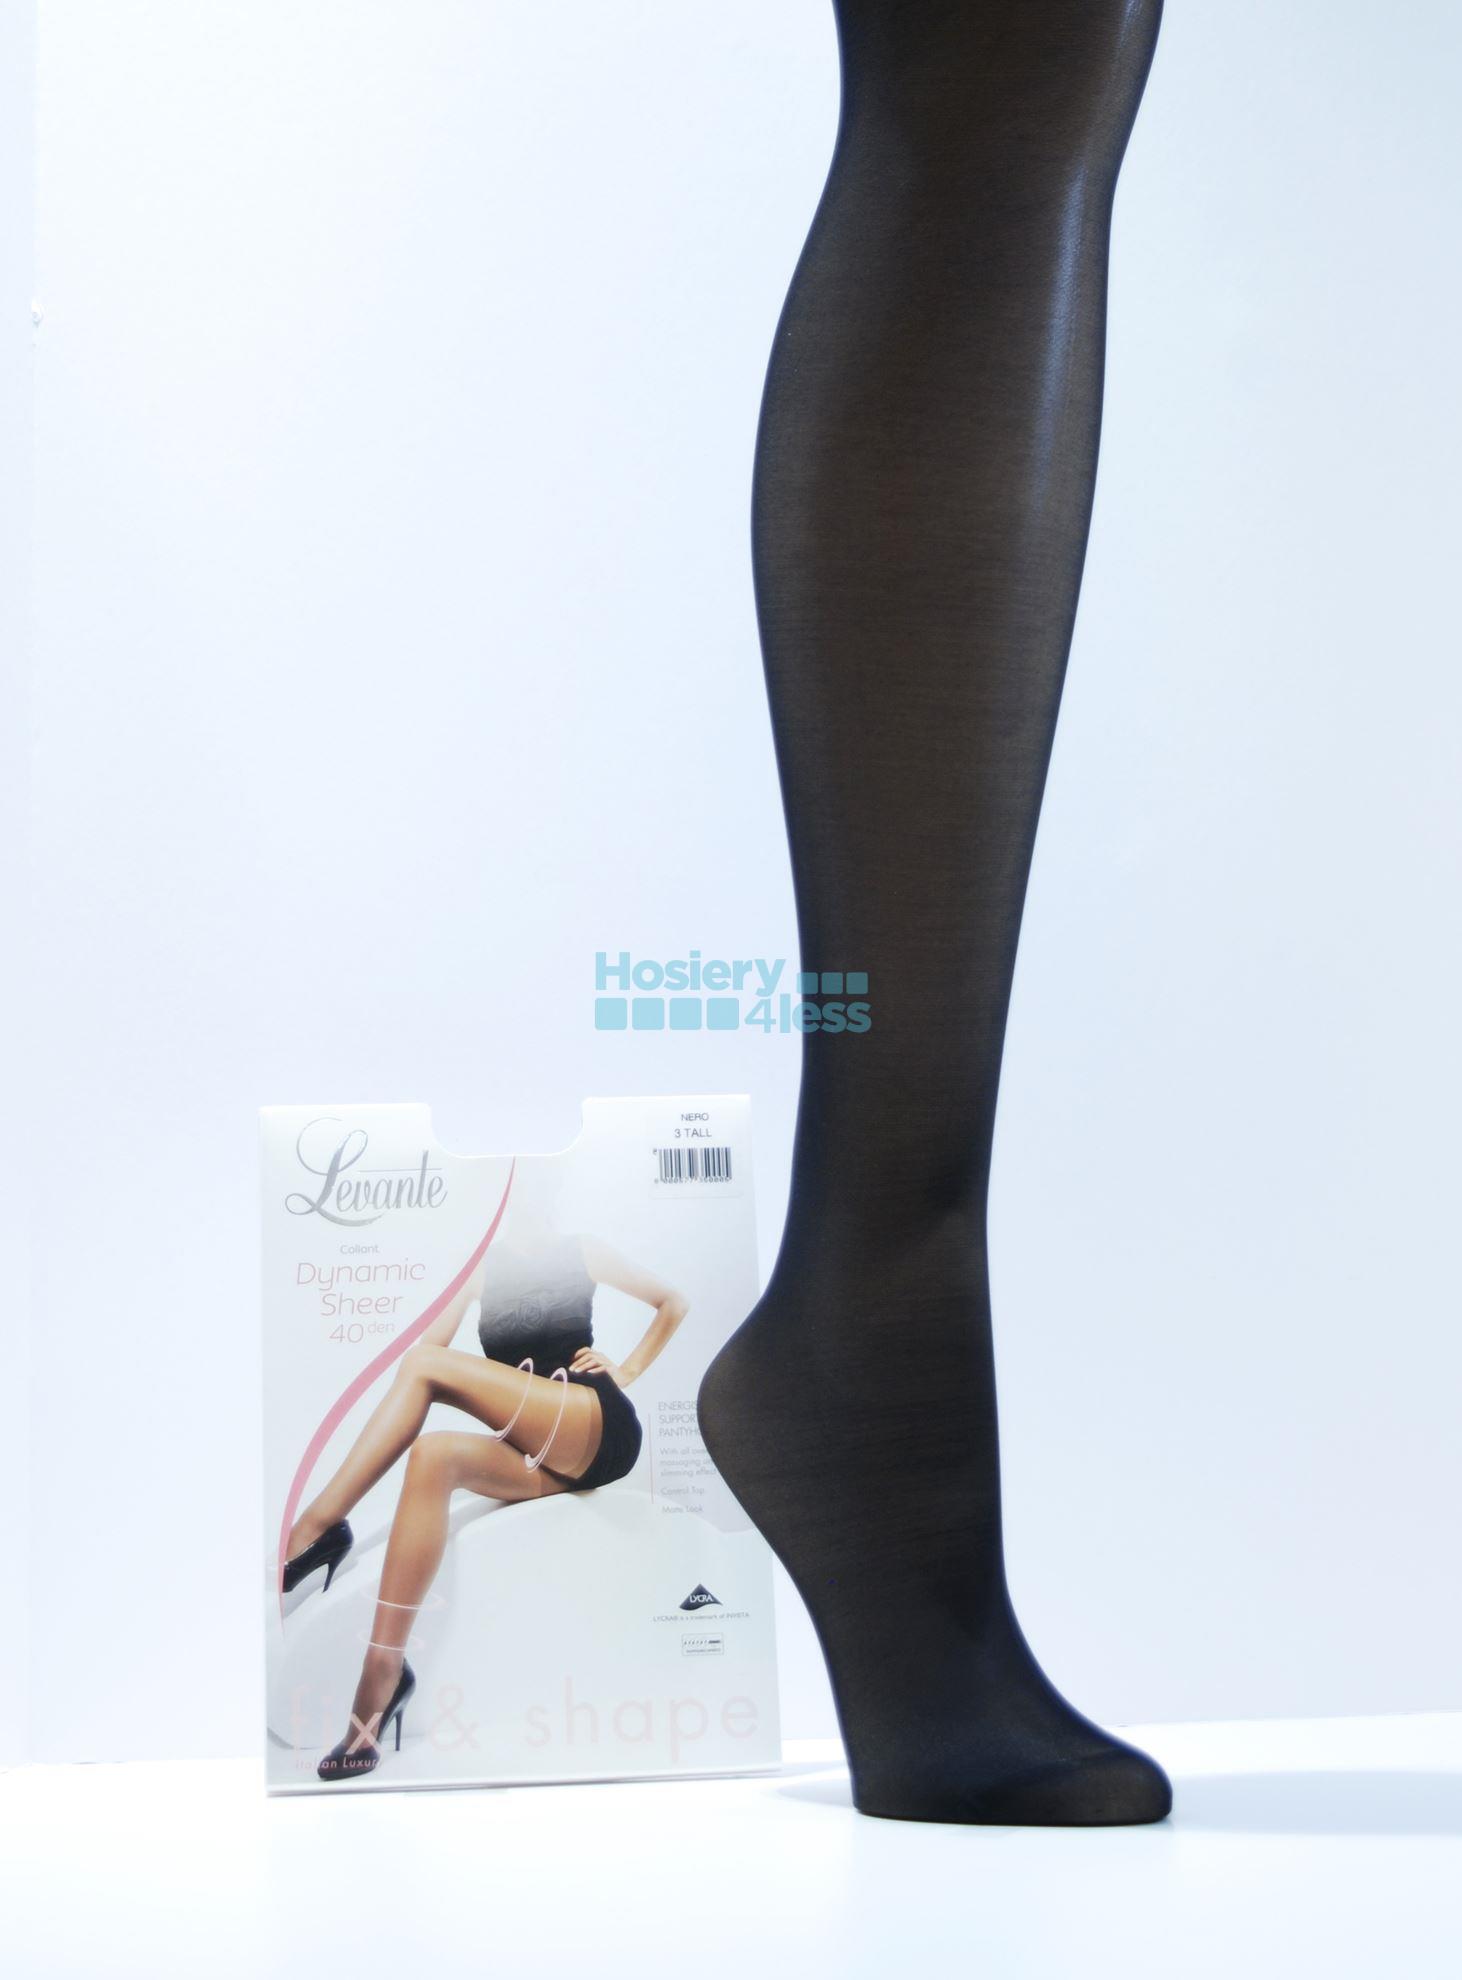 40D SUPPORT PANTYHOSE. Hosiery4Less